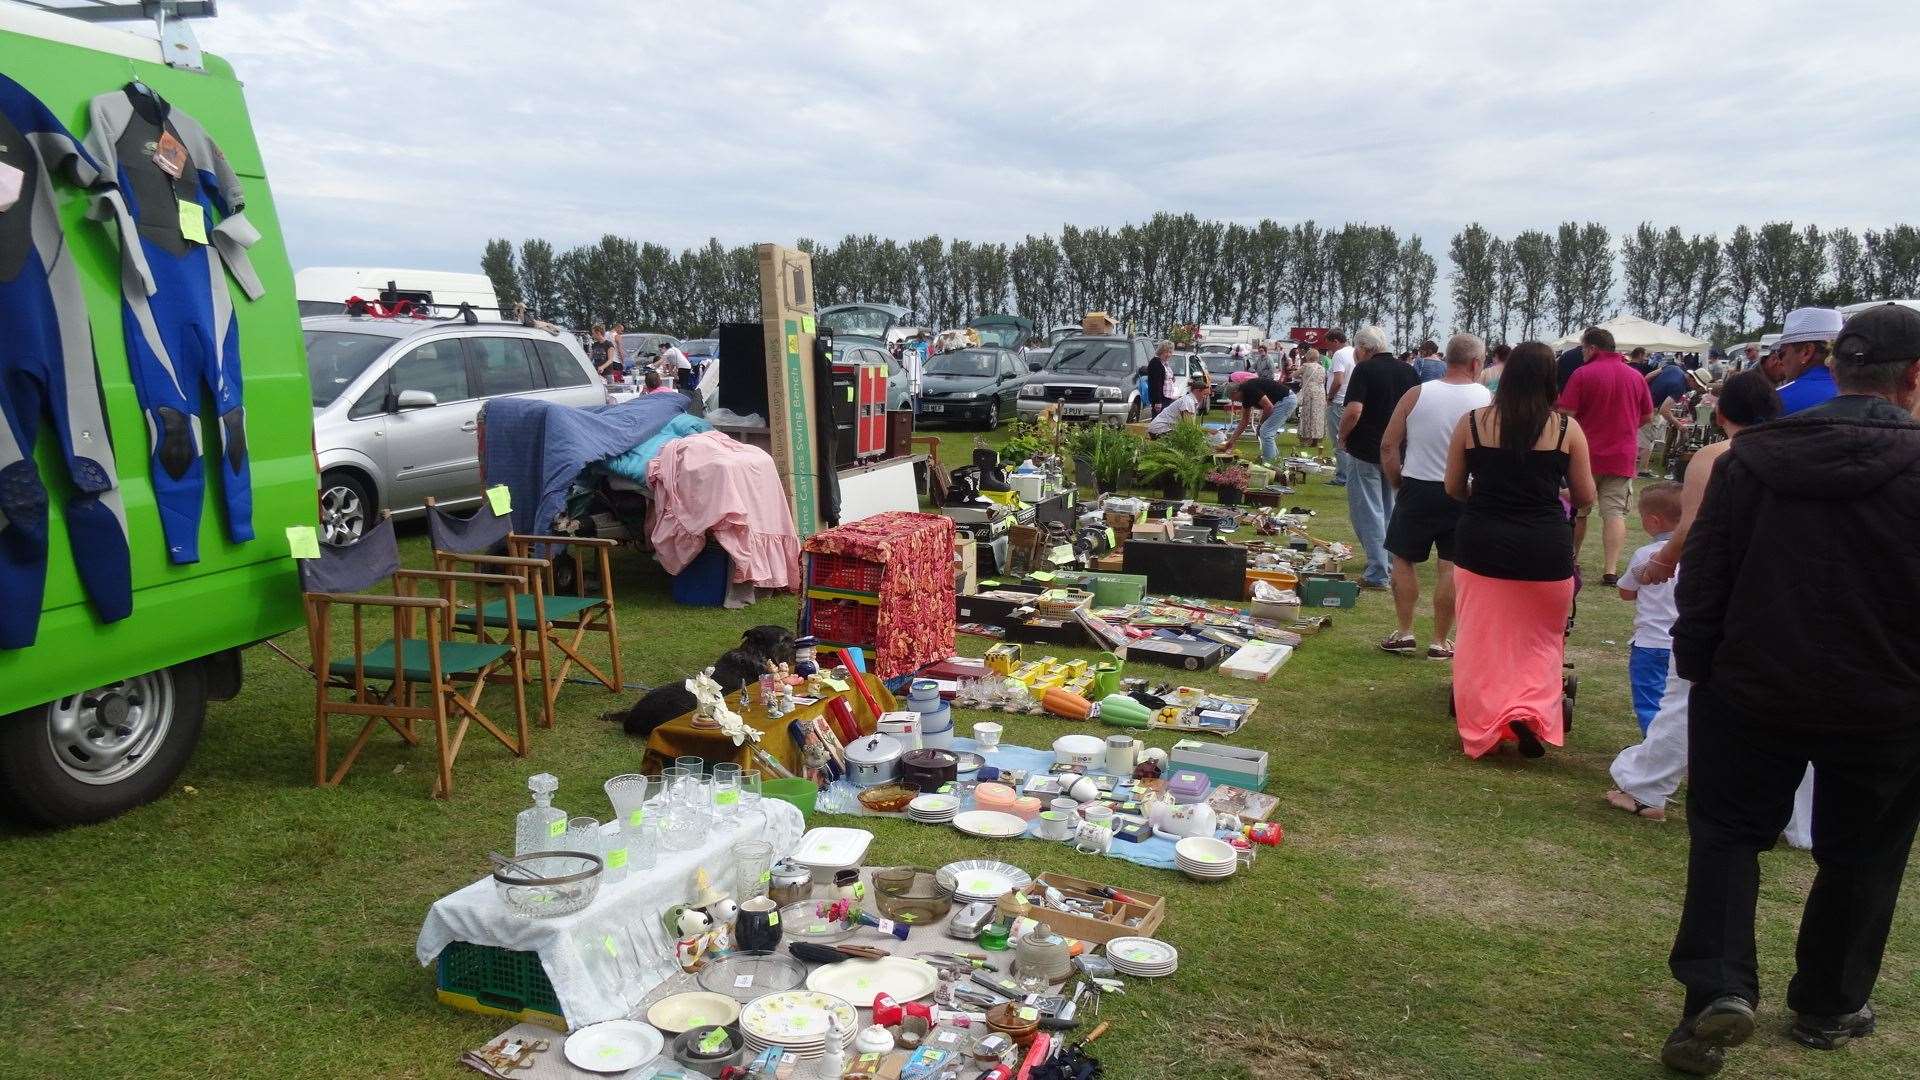 Head to Beechings Way, in Gillingham for a car boot sale on Sunday